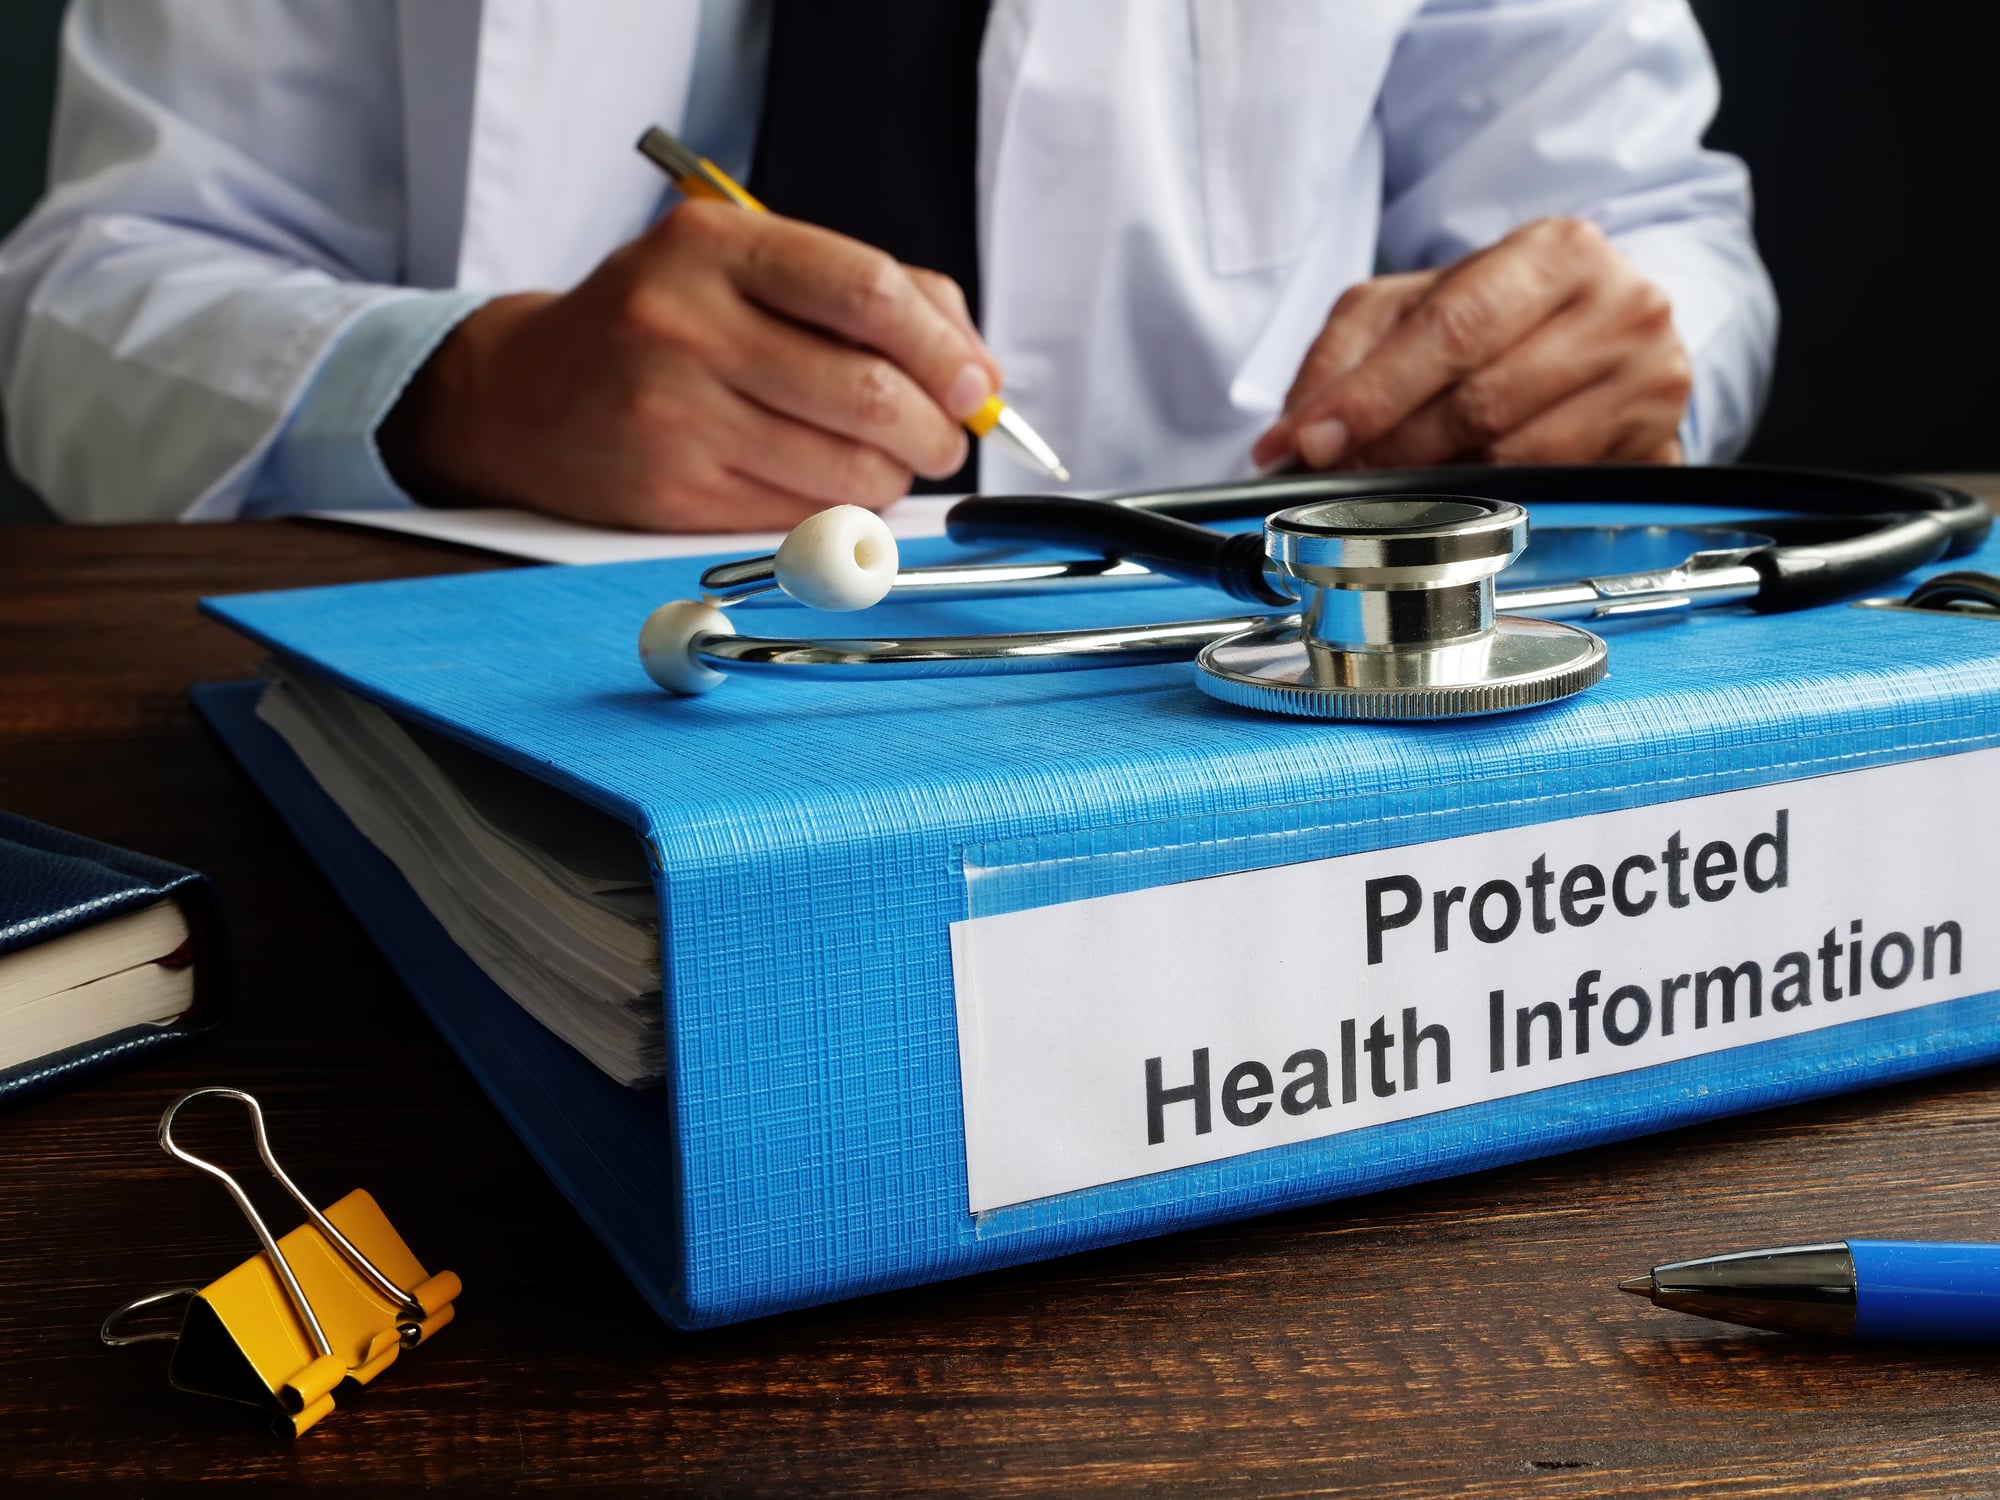 doctor with large binder labeled "Protected Health Information"